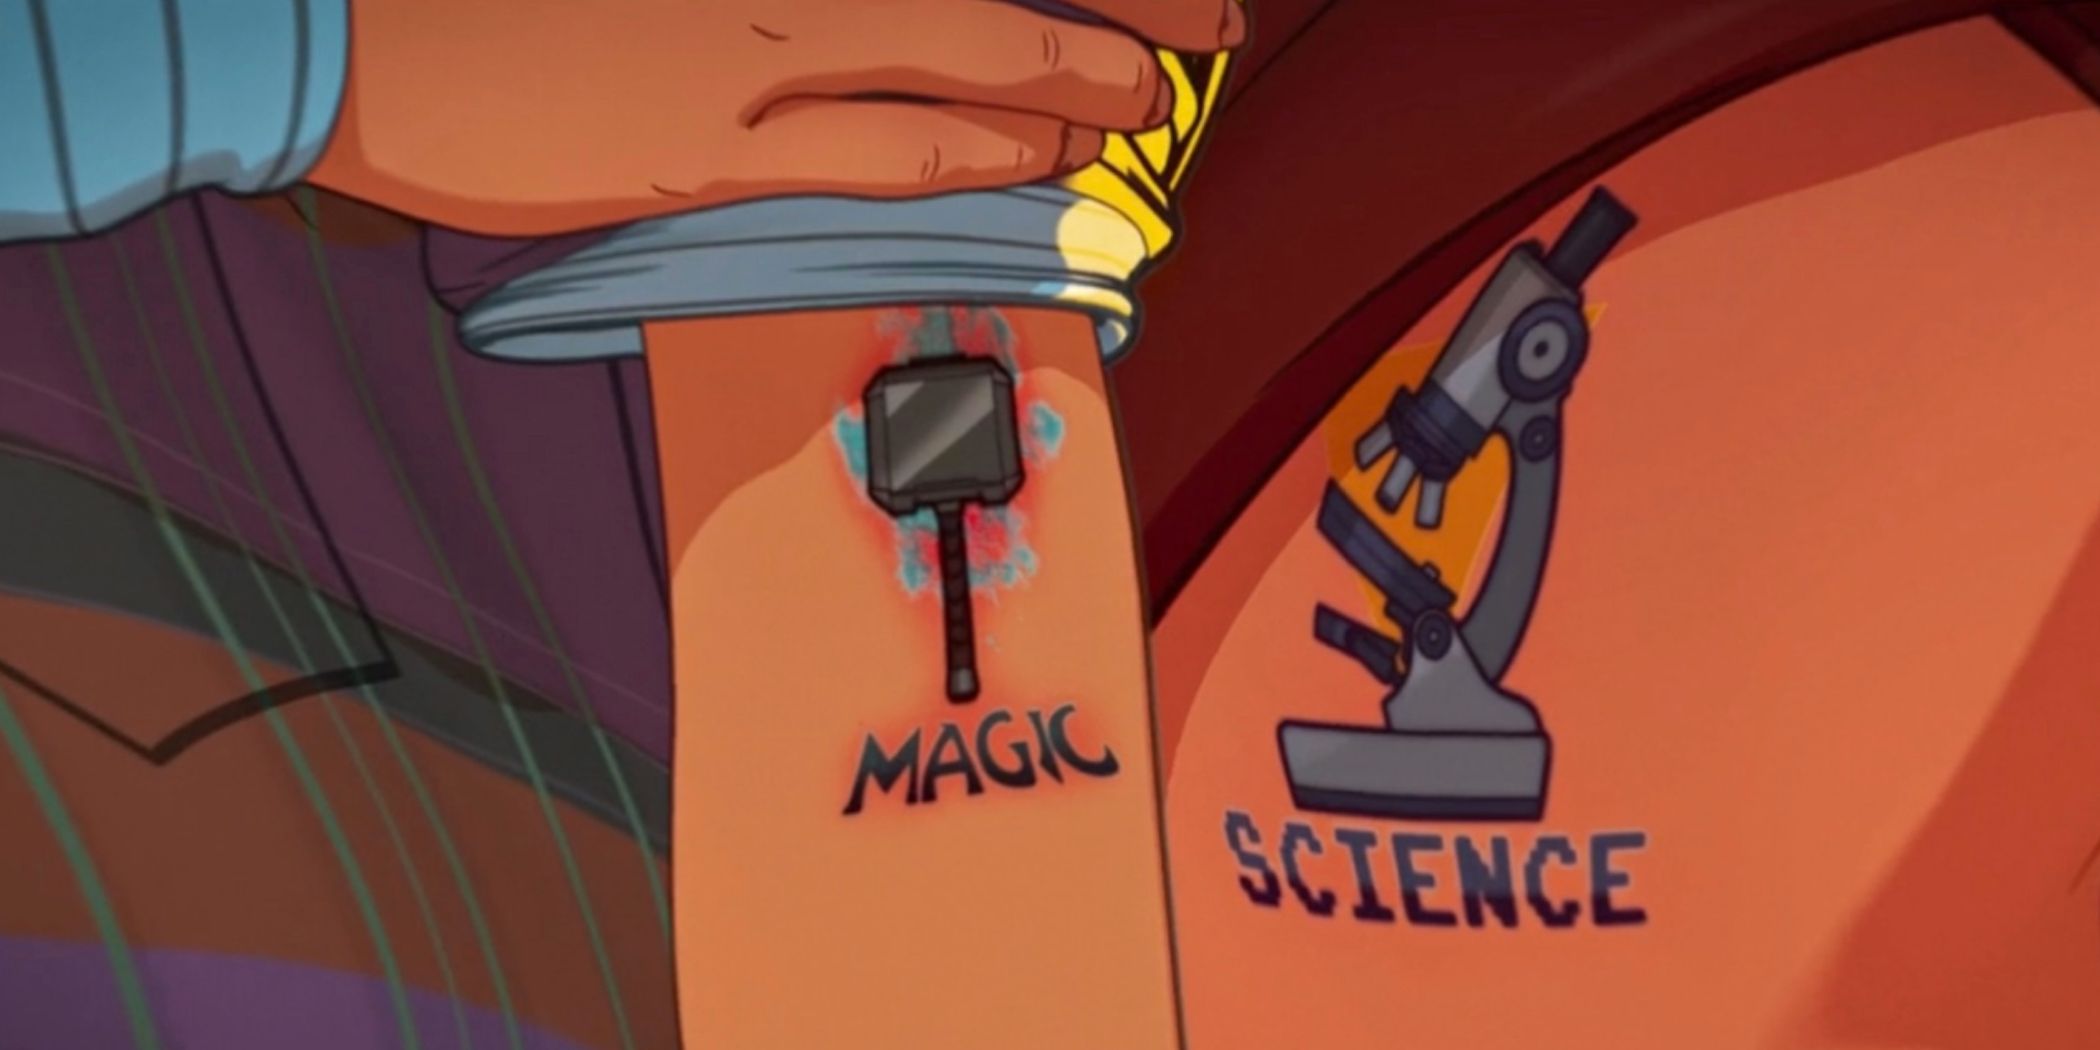 What If Episode 7 Jane and Thor get magic and science tattoos